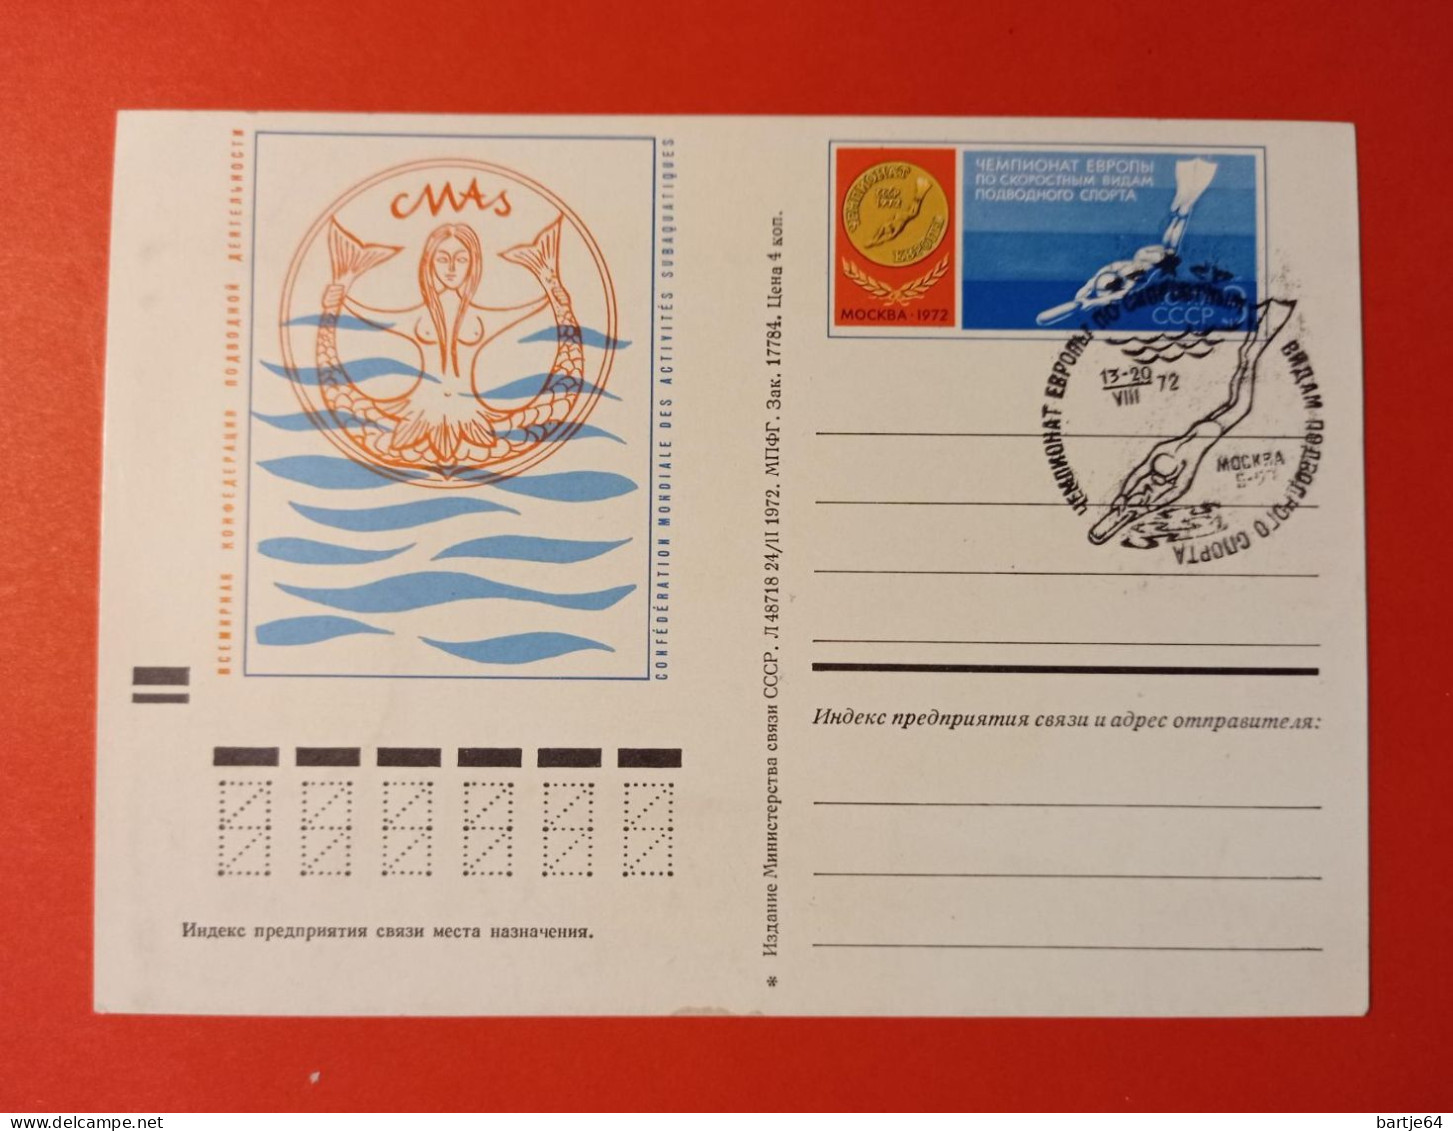 1972 Russia - Card - High Diving